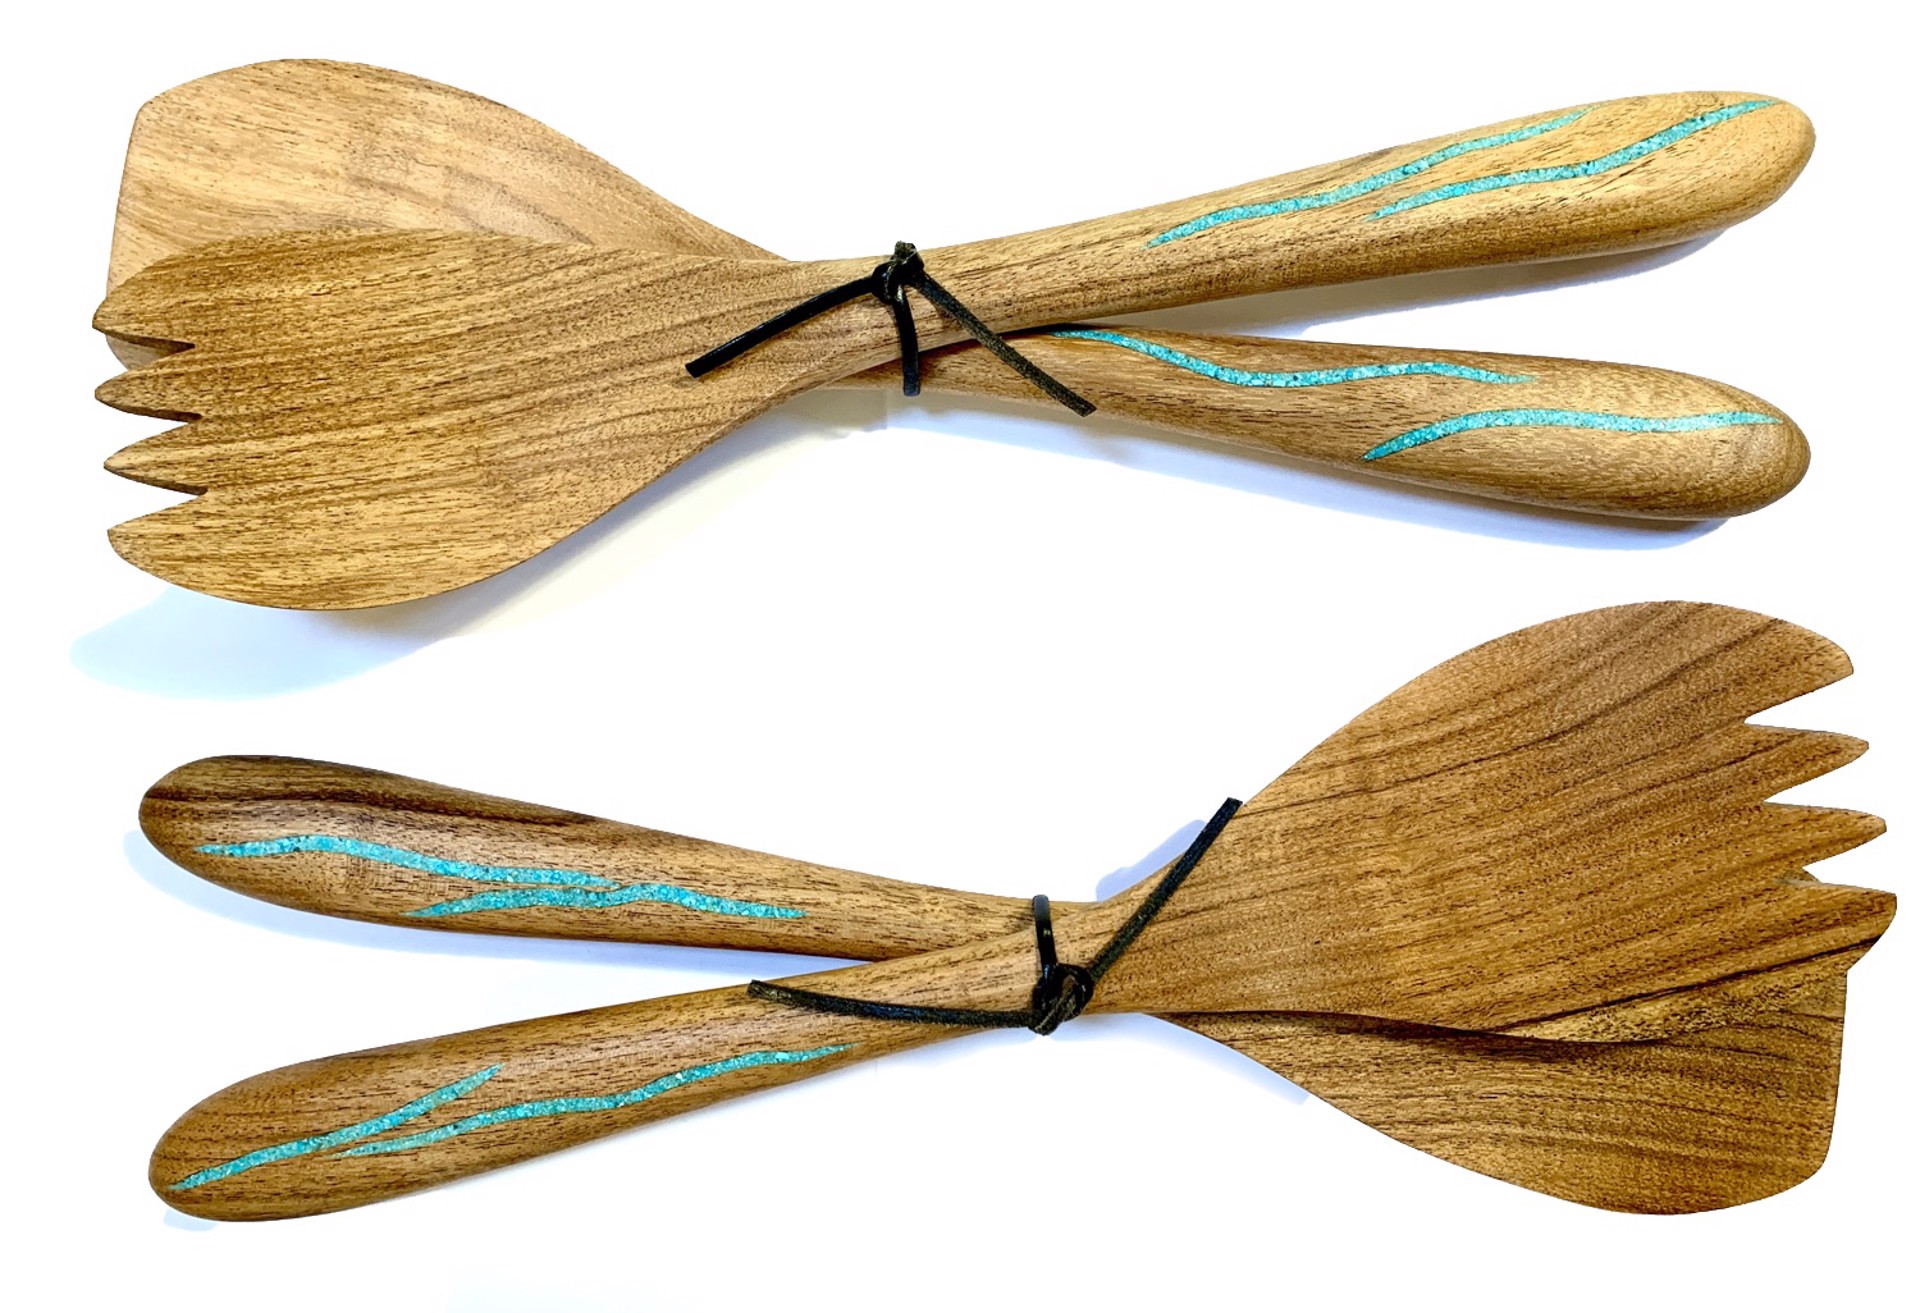 Utensils - Large Salad Forks - Mesquite with Turquoise Inlay by TreeStump Woodcraft